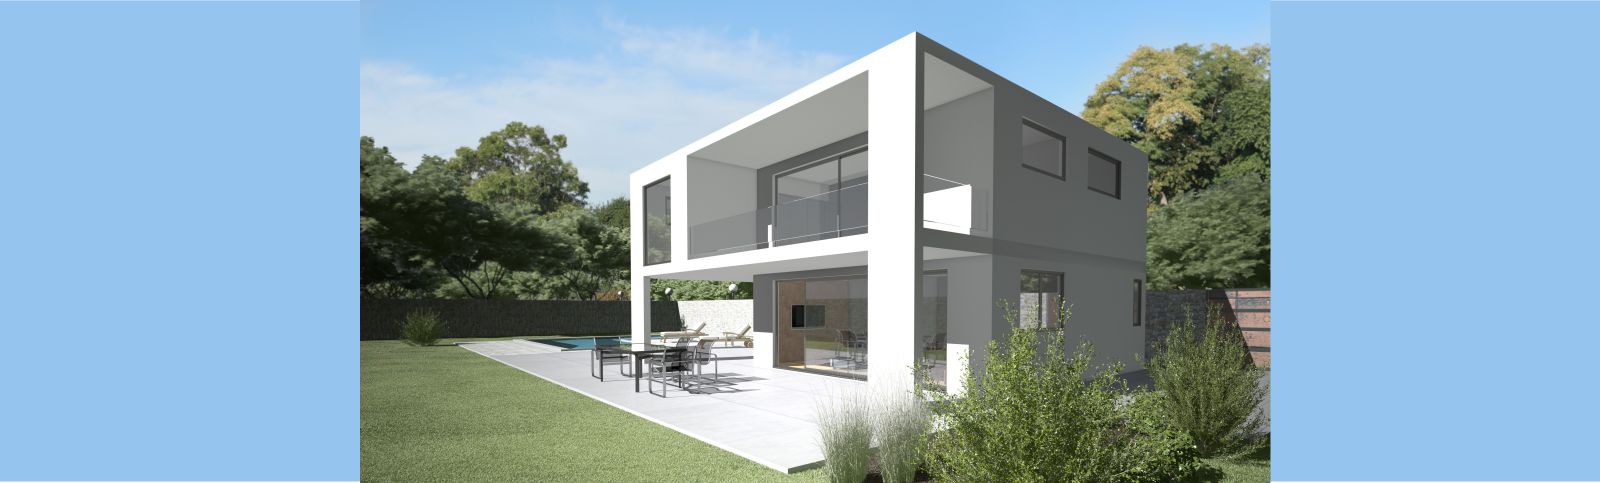 Inmobiliaria Teo. Homes for sale and rental in Valdepeñas